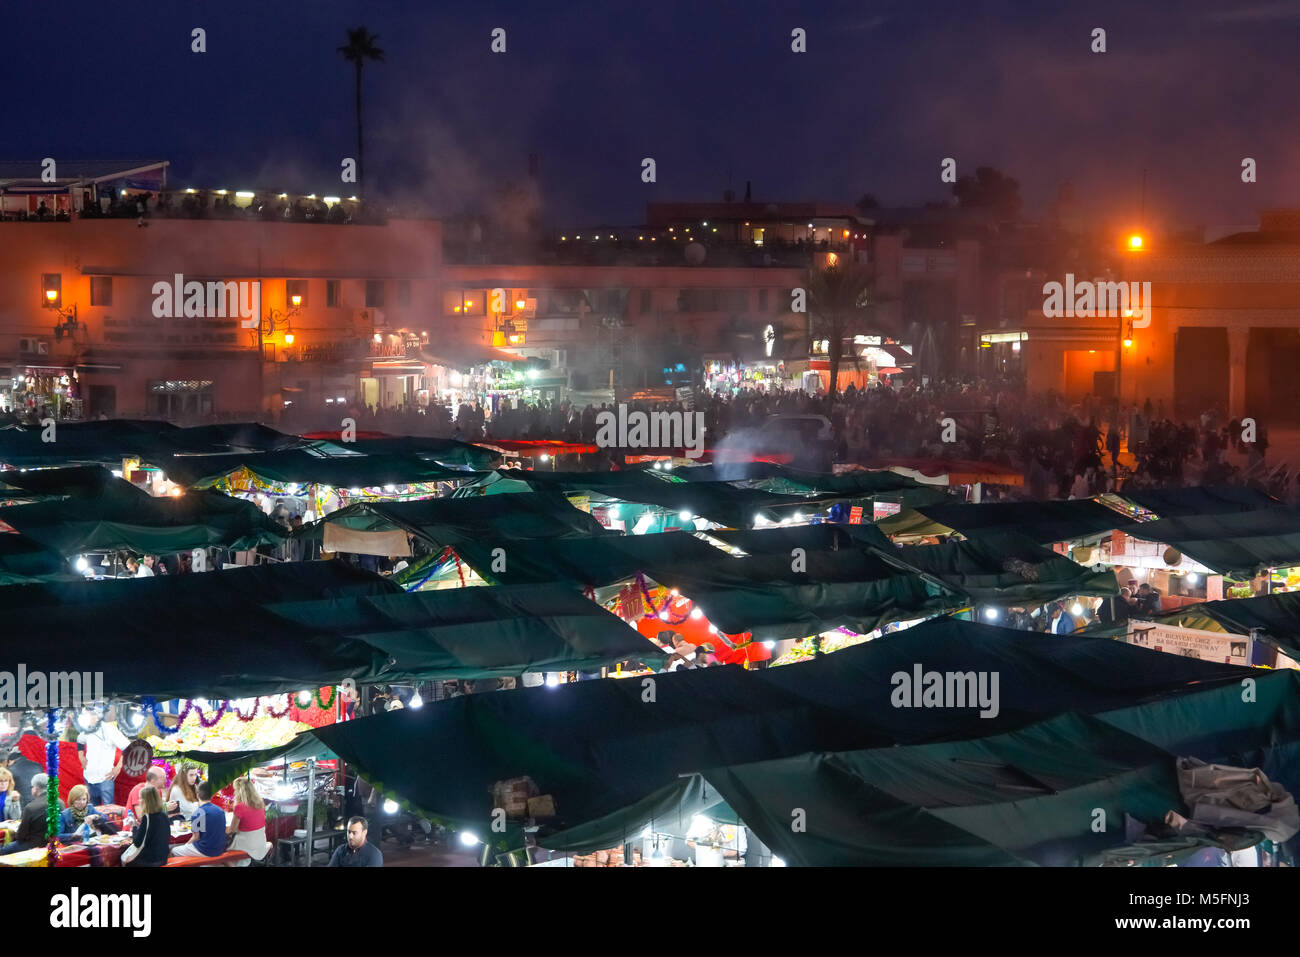 View of the famous Jamaâ El Fna Square and Koutoubia Mosque in Marrakesh, Morocco. Stock Photo